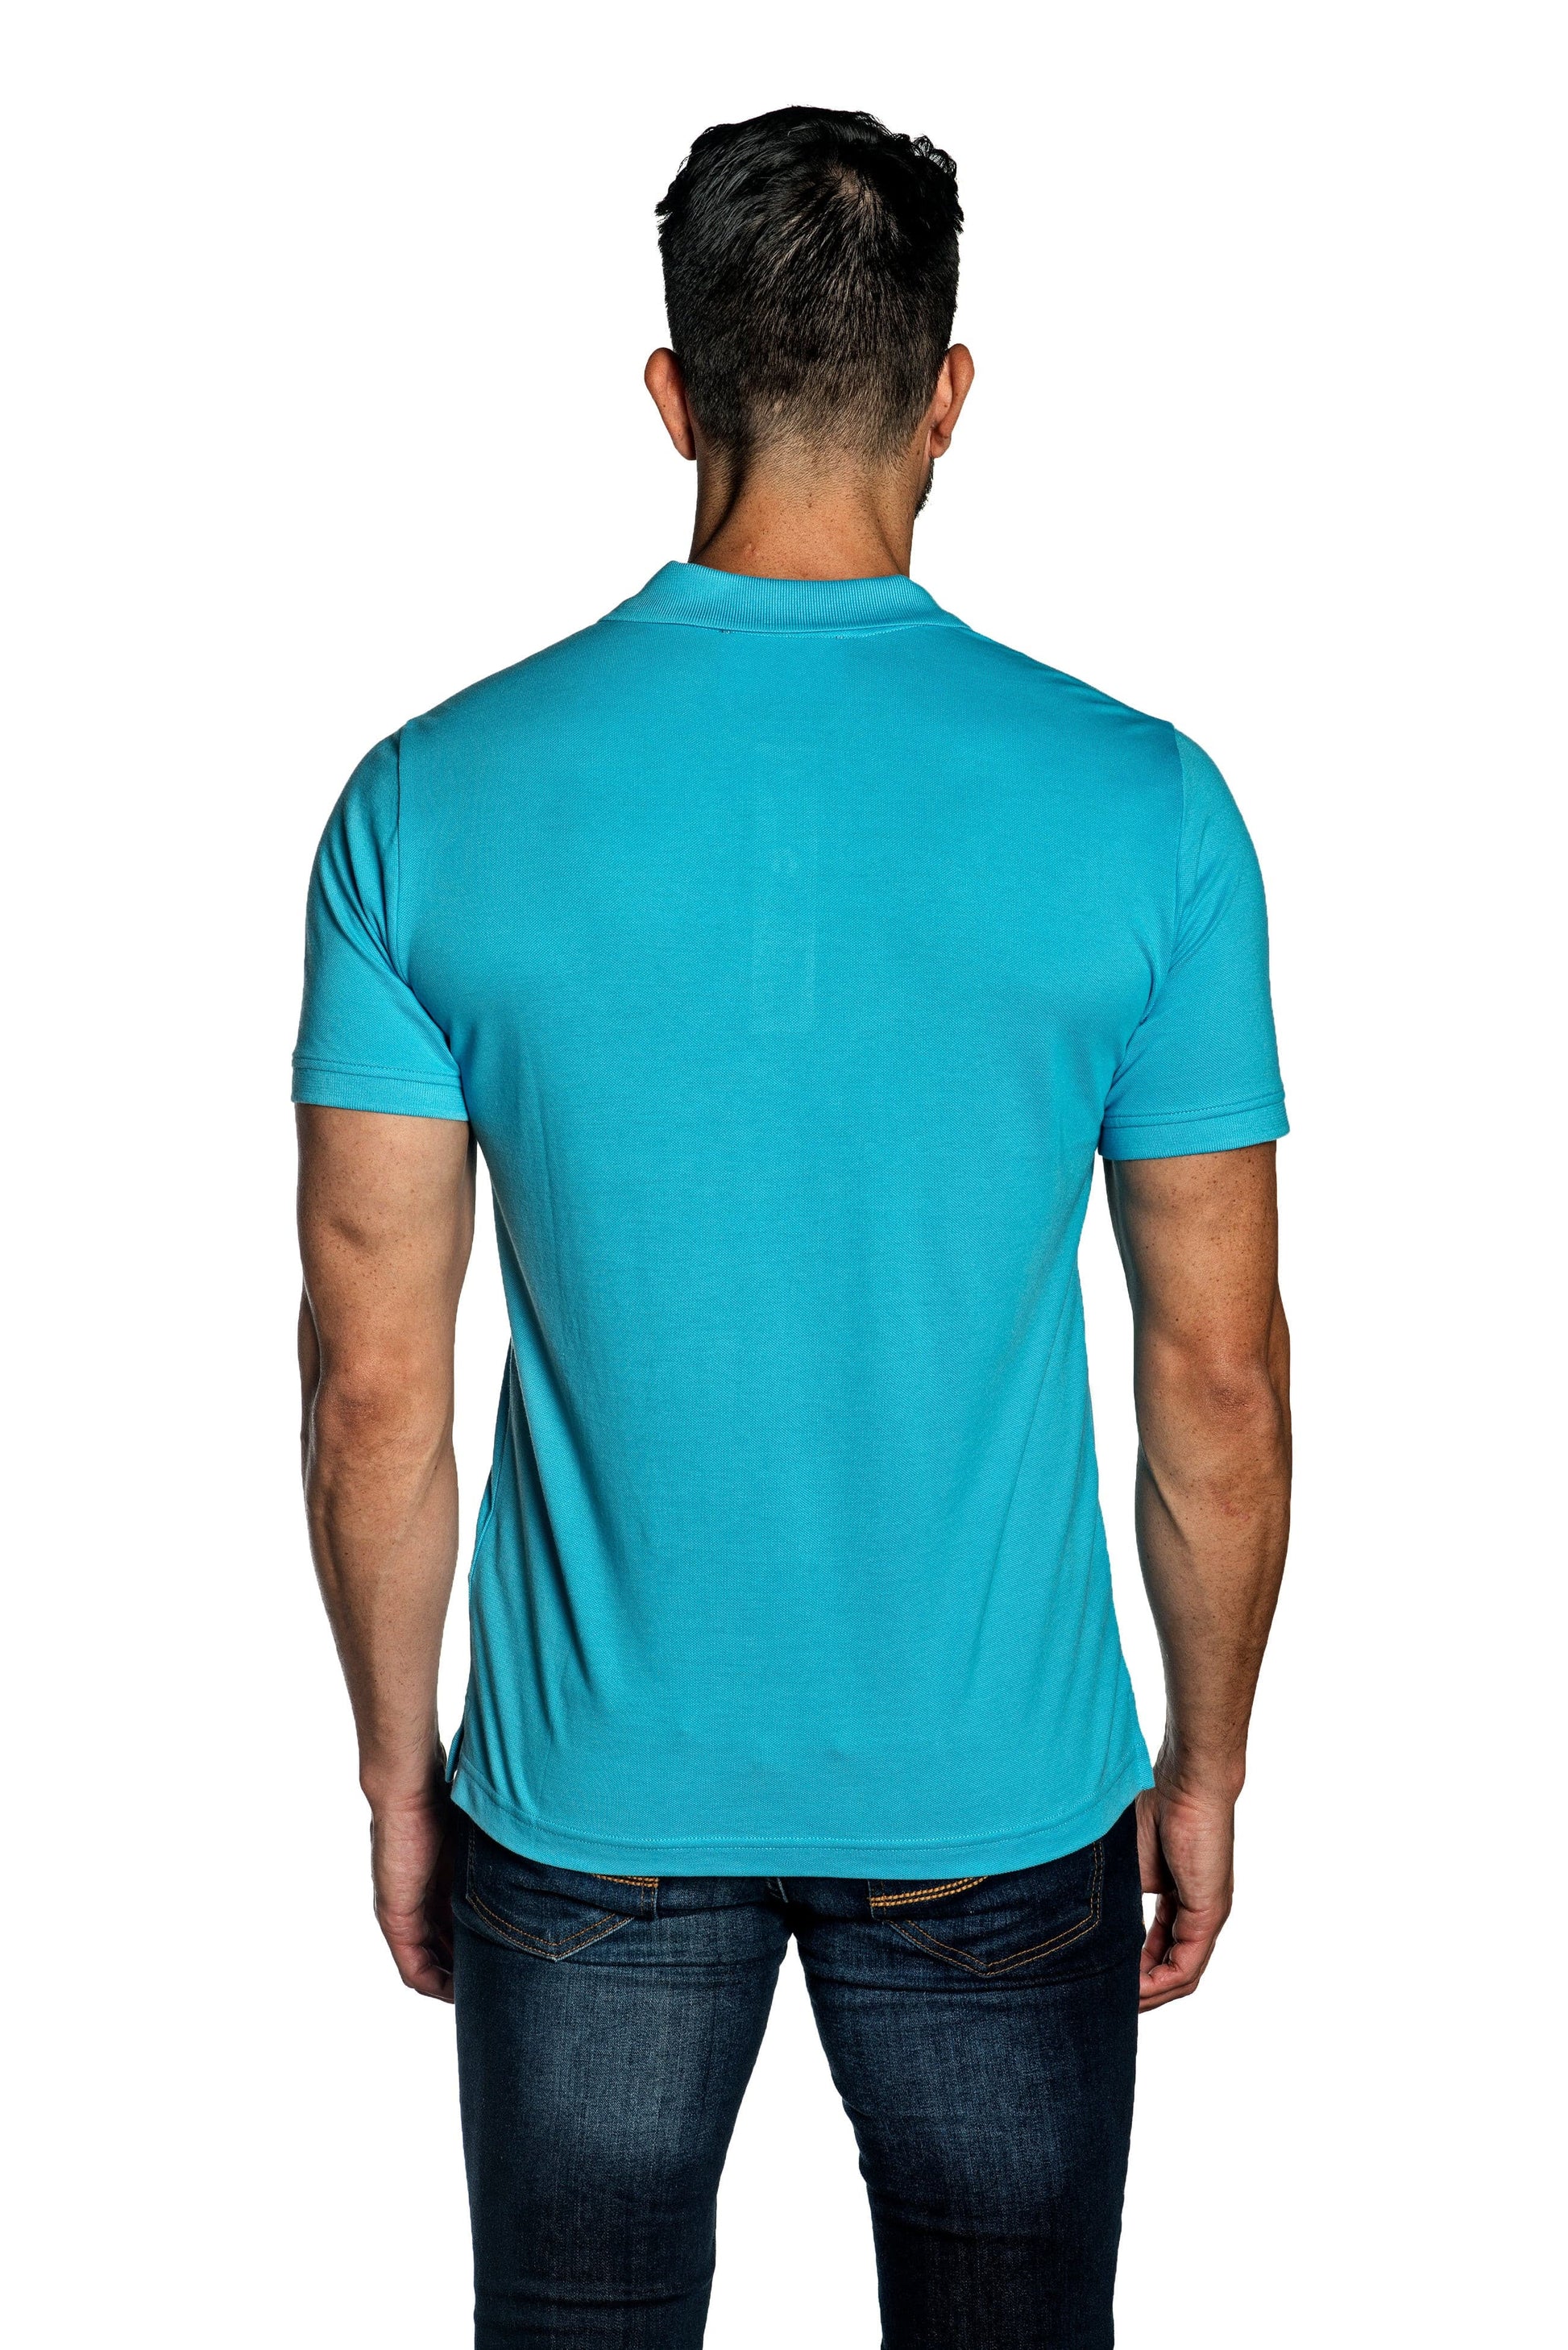 Turquoise Mens Polo With Star Embroidery P-22.